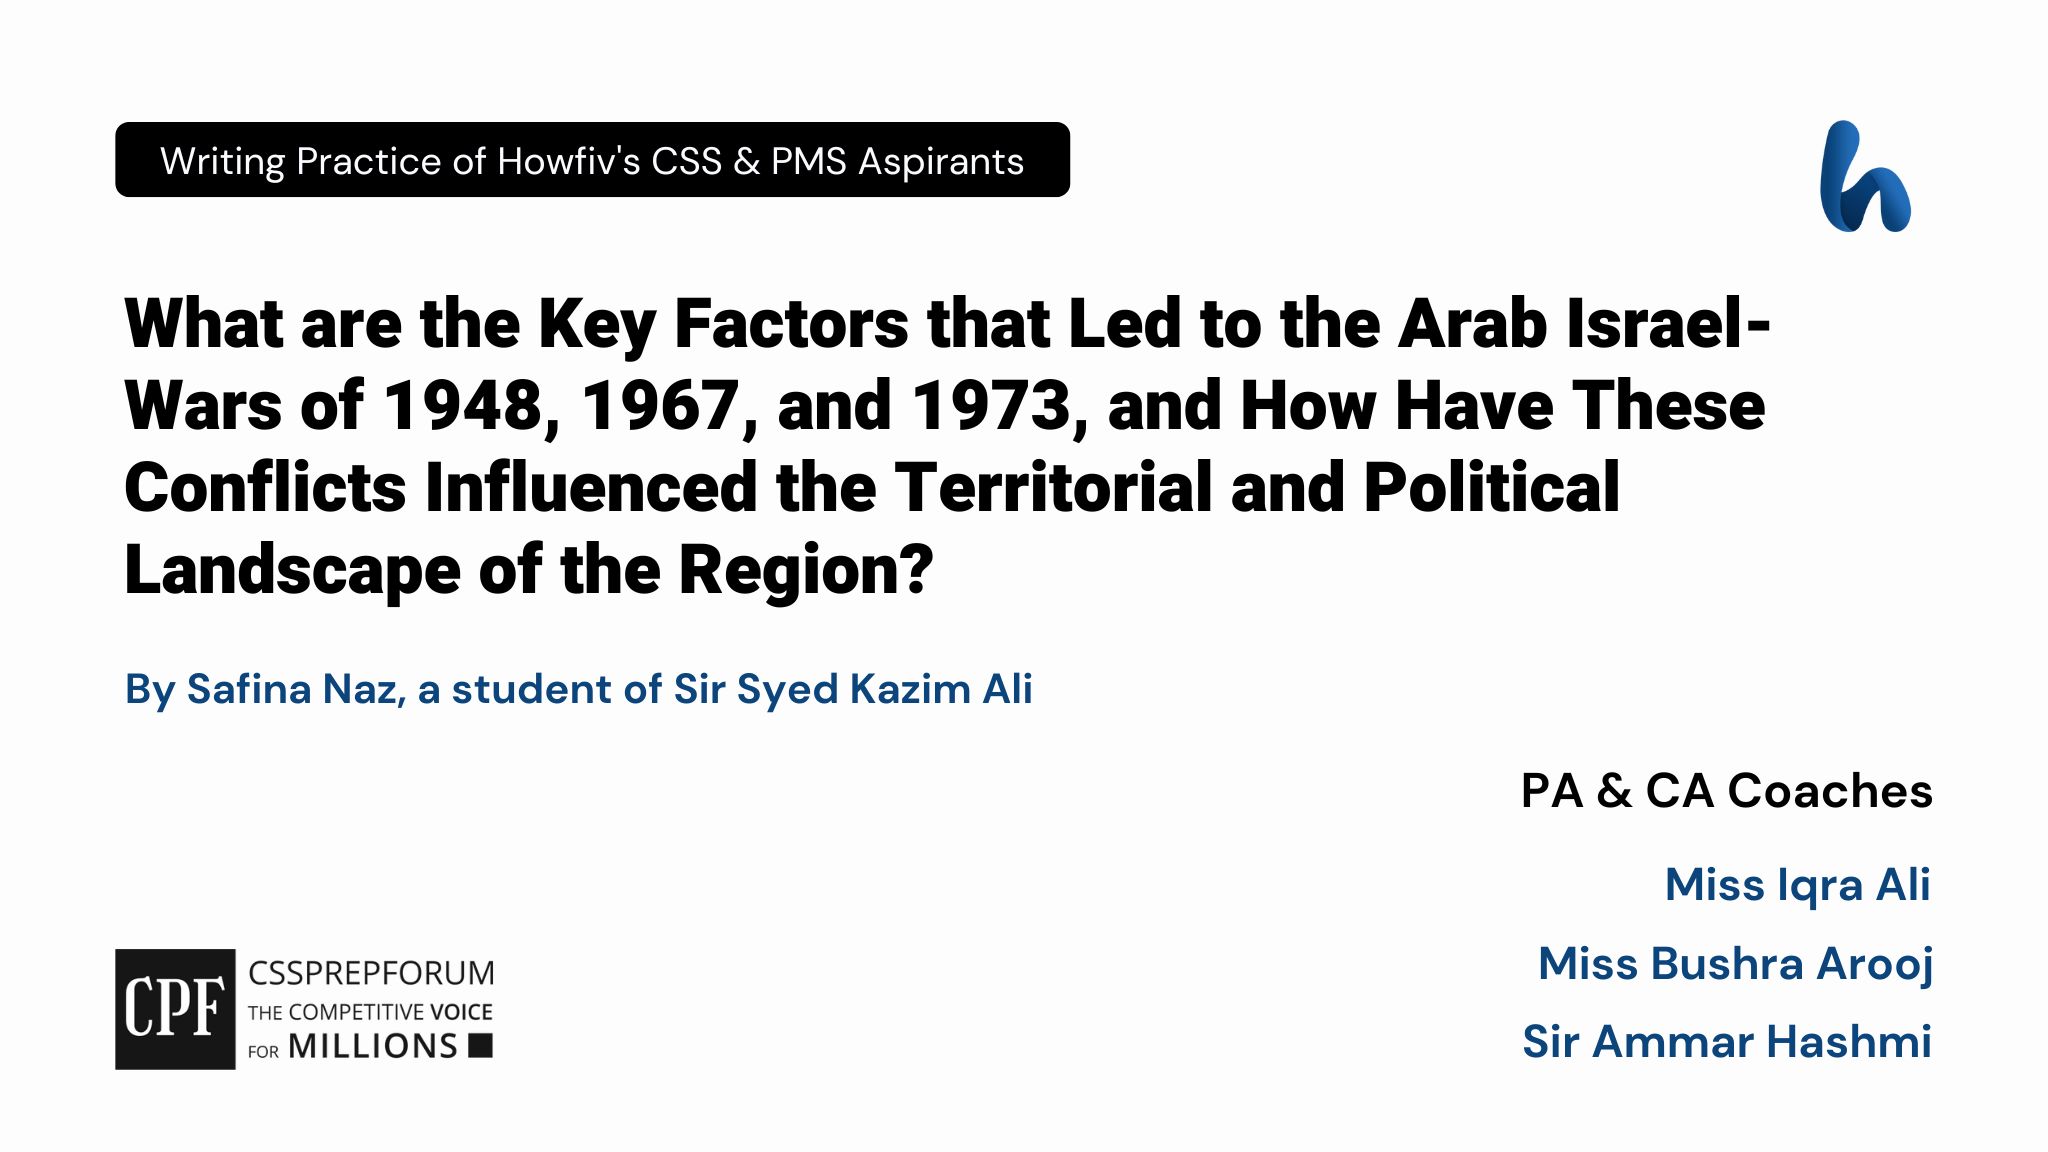 CSS Current Affairs article | Key Factors that Led to the Arab Israel-Wars and Their Influence | is written by Safina Naz Under the Supervision of Sir Ammar Hashmi...